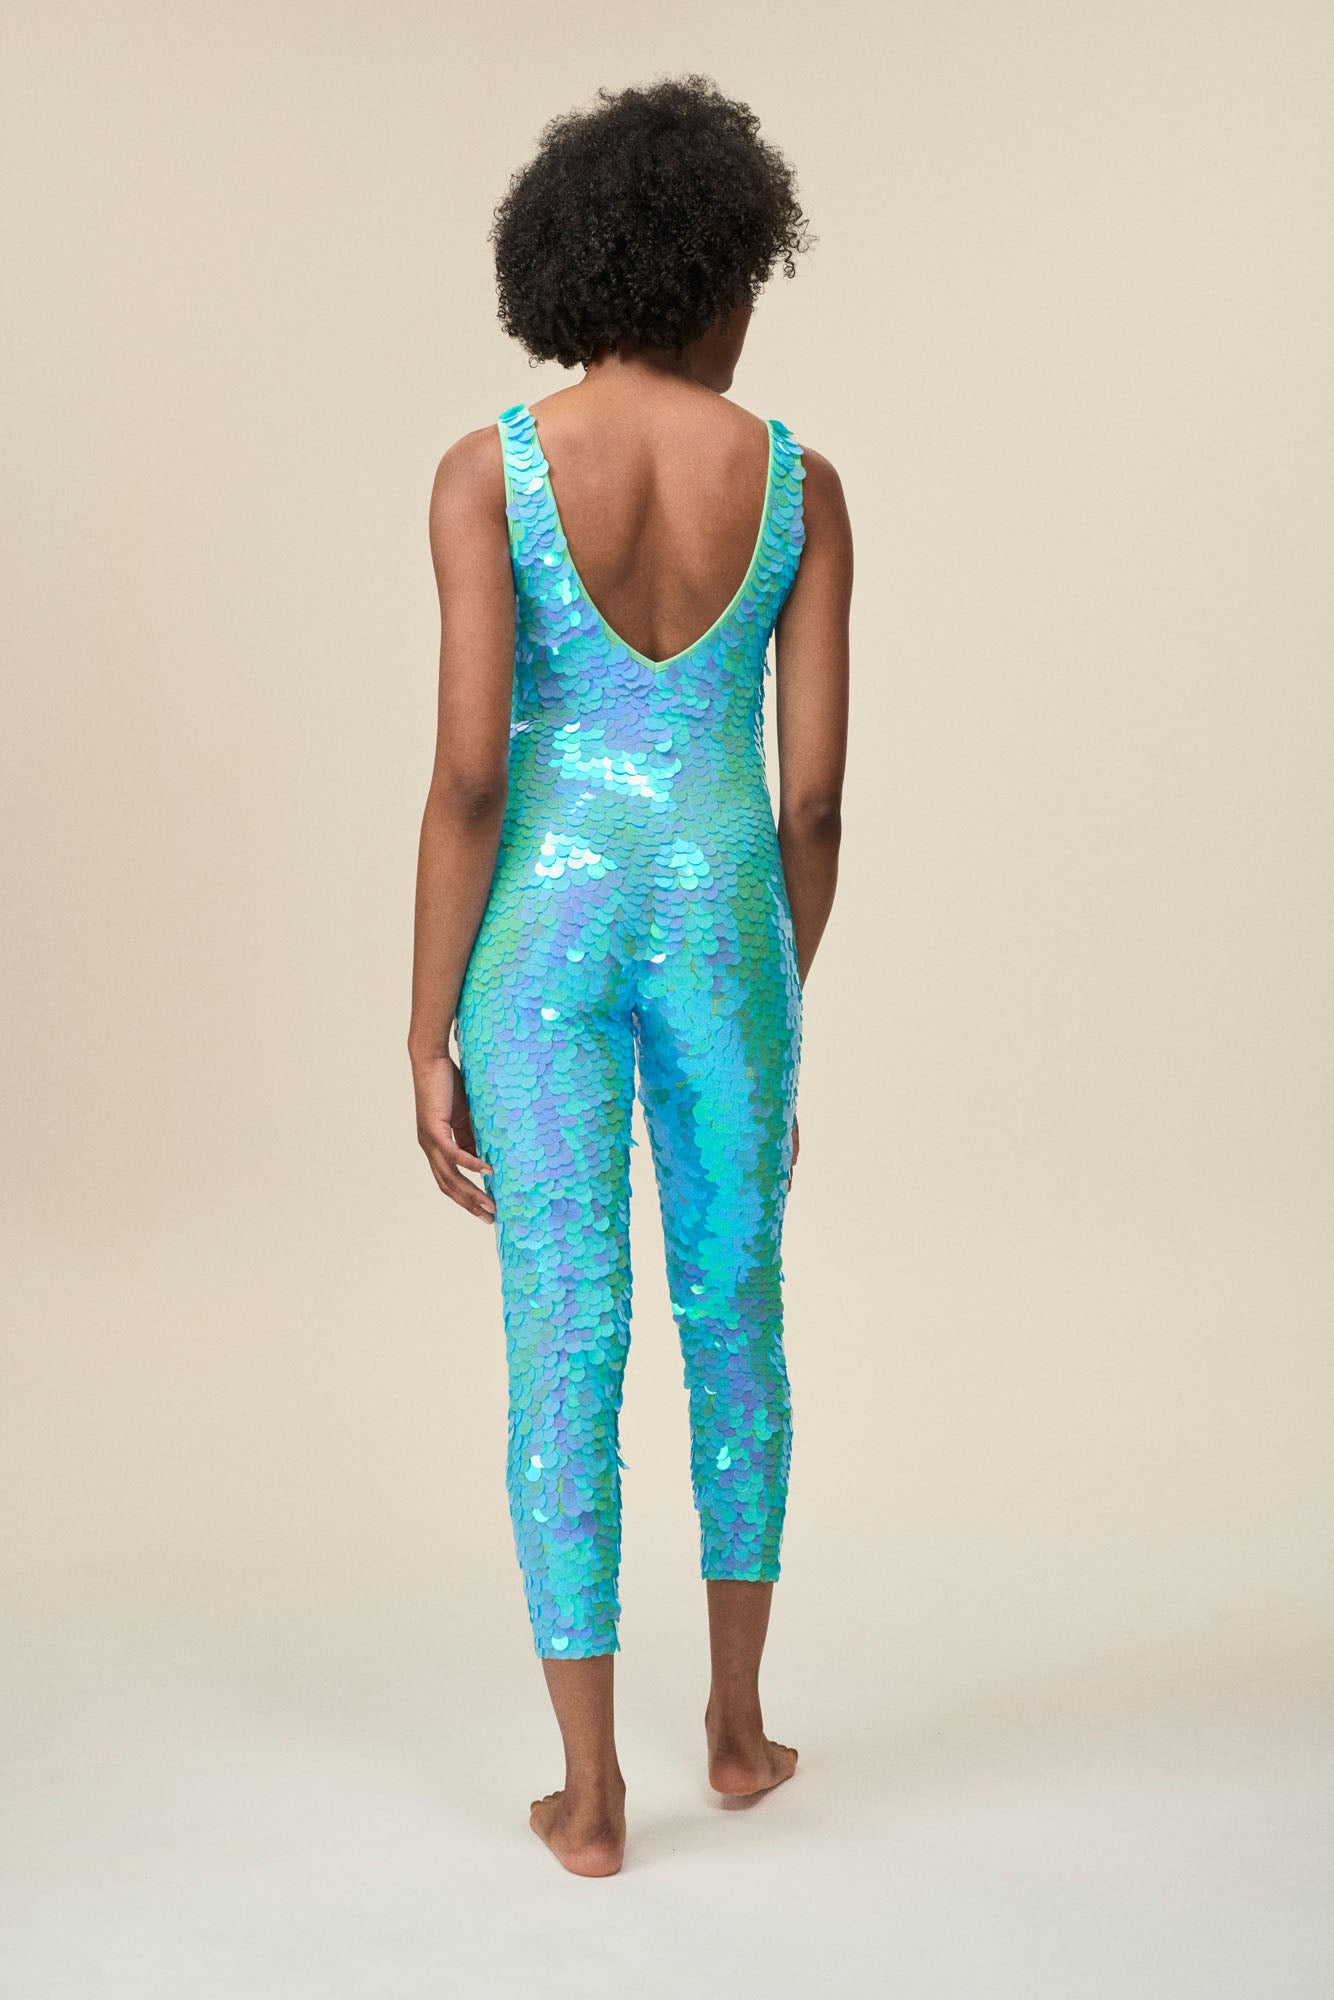 Back view of a woman wearing the Rosa Bloom Electra jumpsuit in a mesmerising aqua blue. A stretchy jumpsuit with low V back detail that hugs and contours her body embellishing her in sparkling sequins.